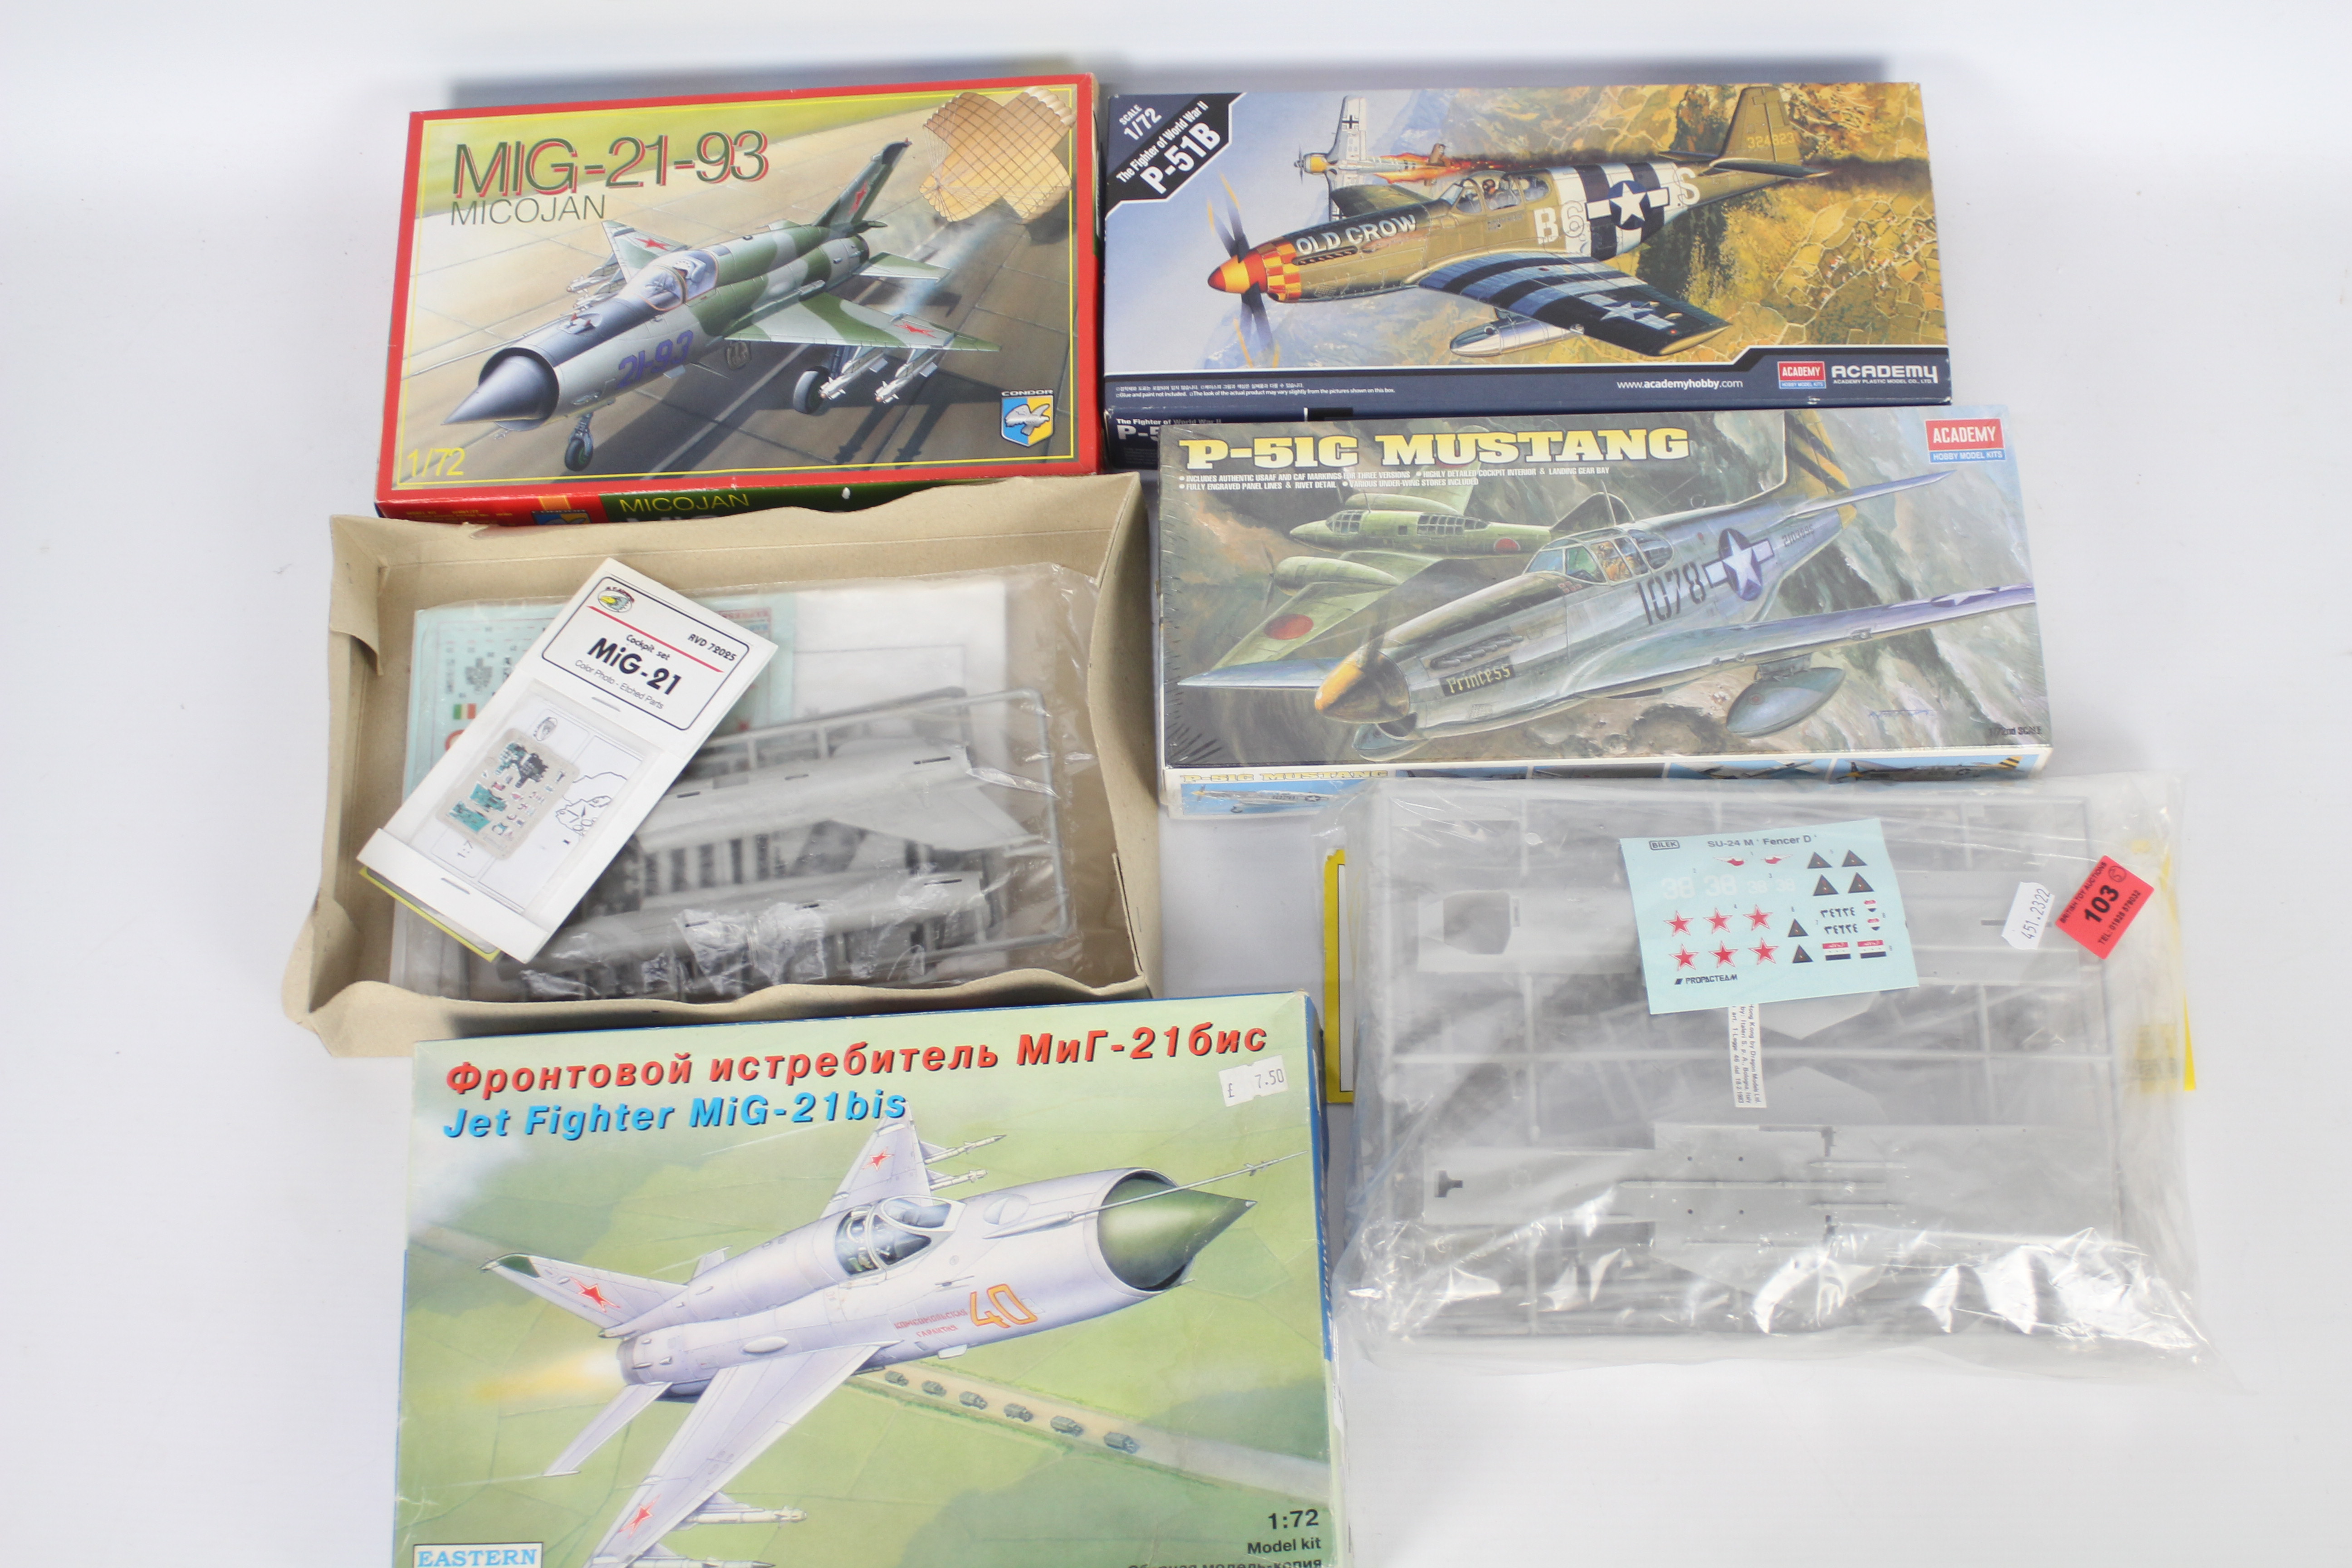 Five model kits of military aeroplanes comprising Mustang P-5IC (Academy),